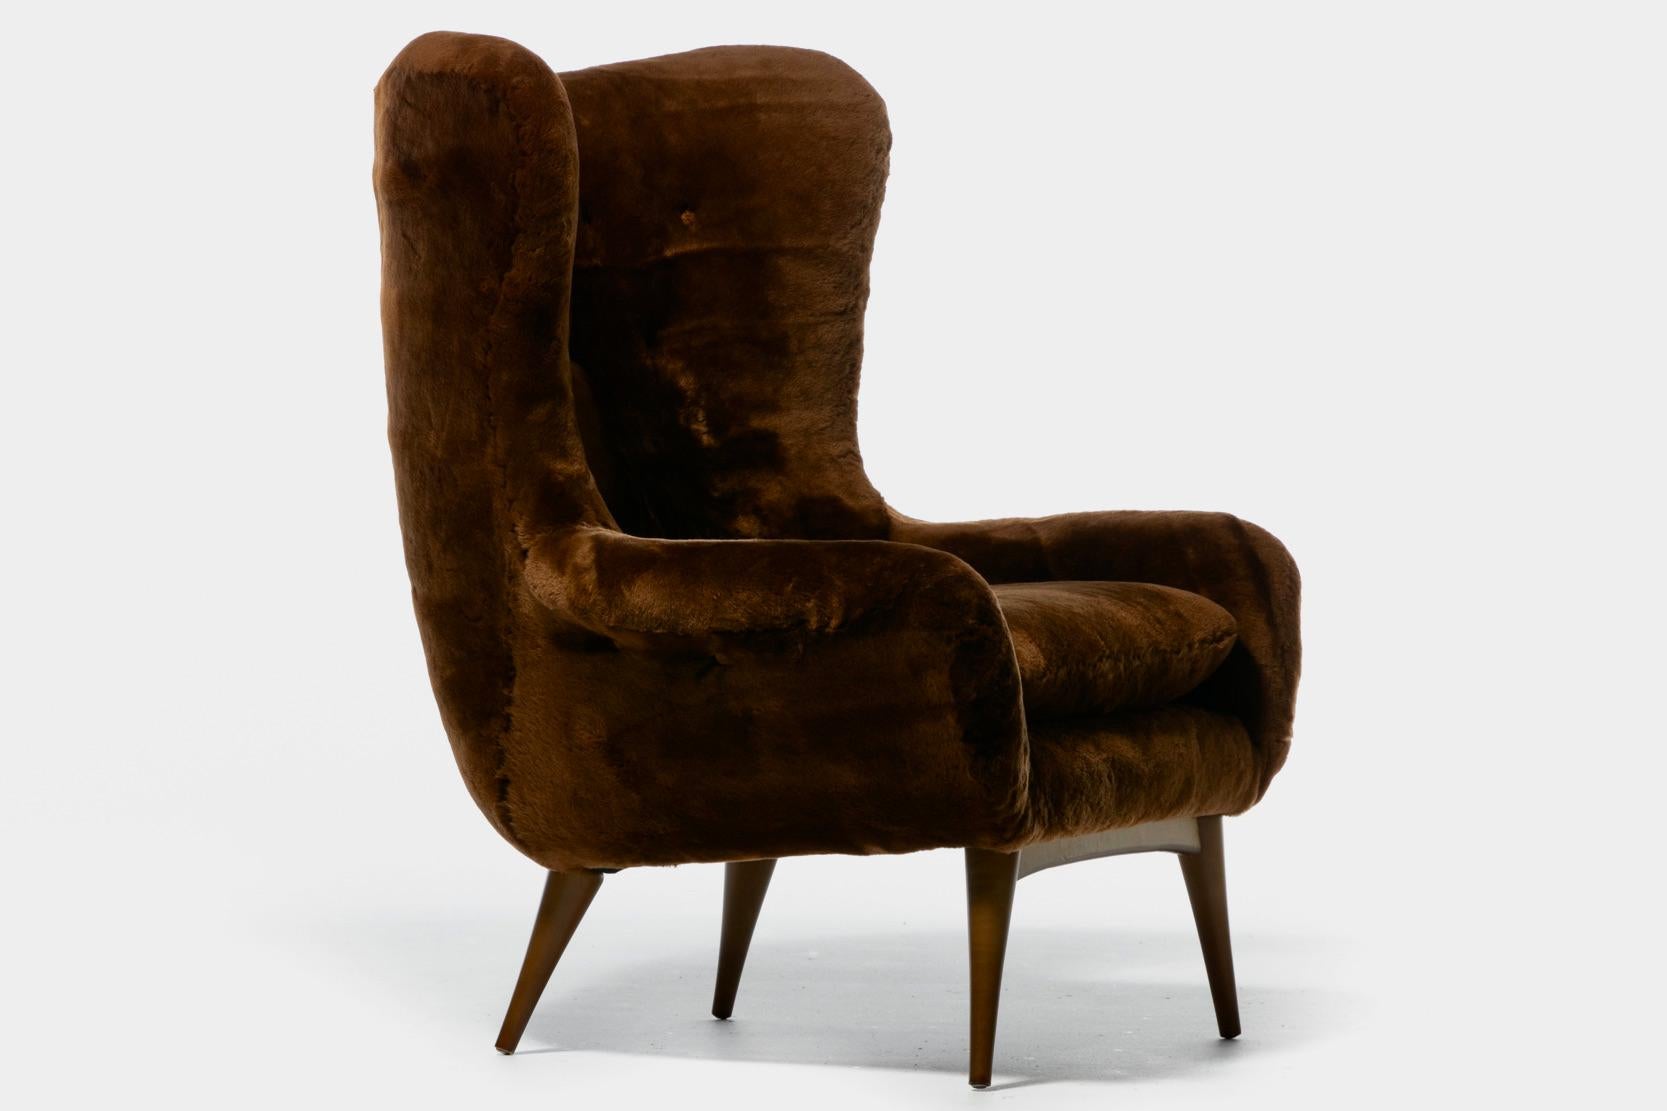 Karpen Wingback Chairs in Luxuriously Soft Milk Chocolate Shearling, circa 1950s For Sale 6